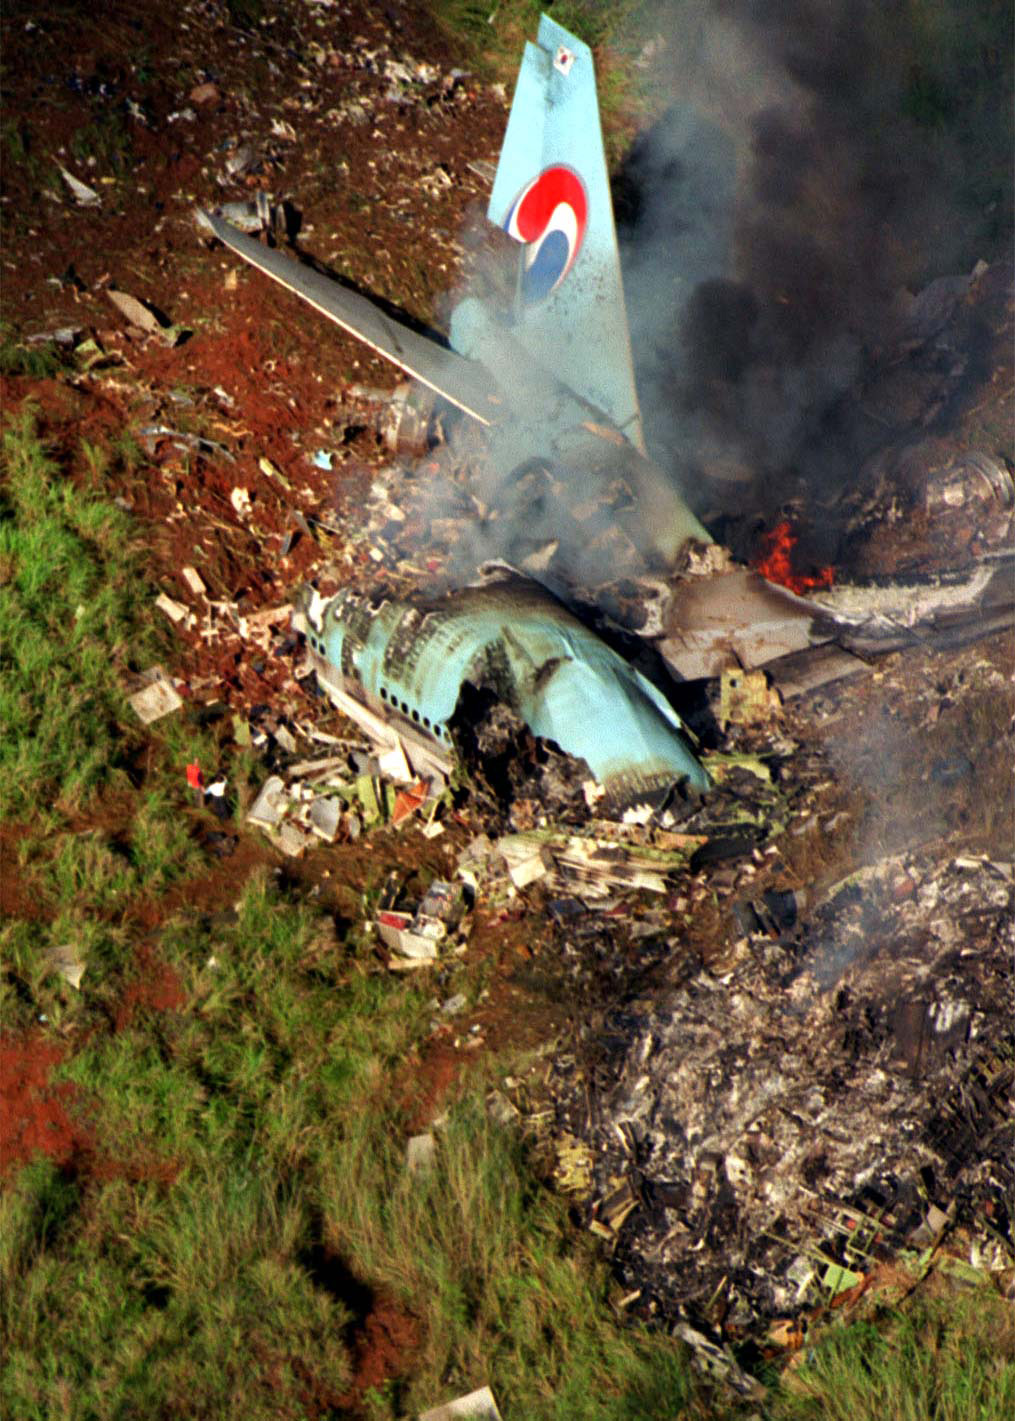 Cold War: Soviet Union admits to shooting down Korean Air Flight KAL-007, stating that the pilots did not know it was a civilian aircraft when it violated Soviet airspace. All 269 on board die